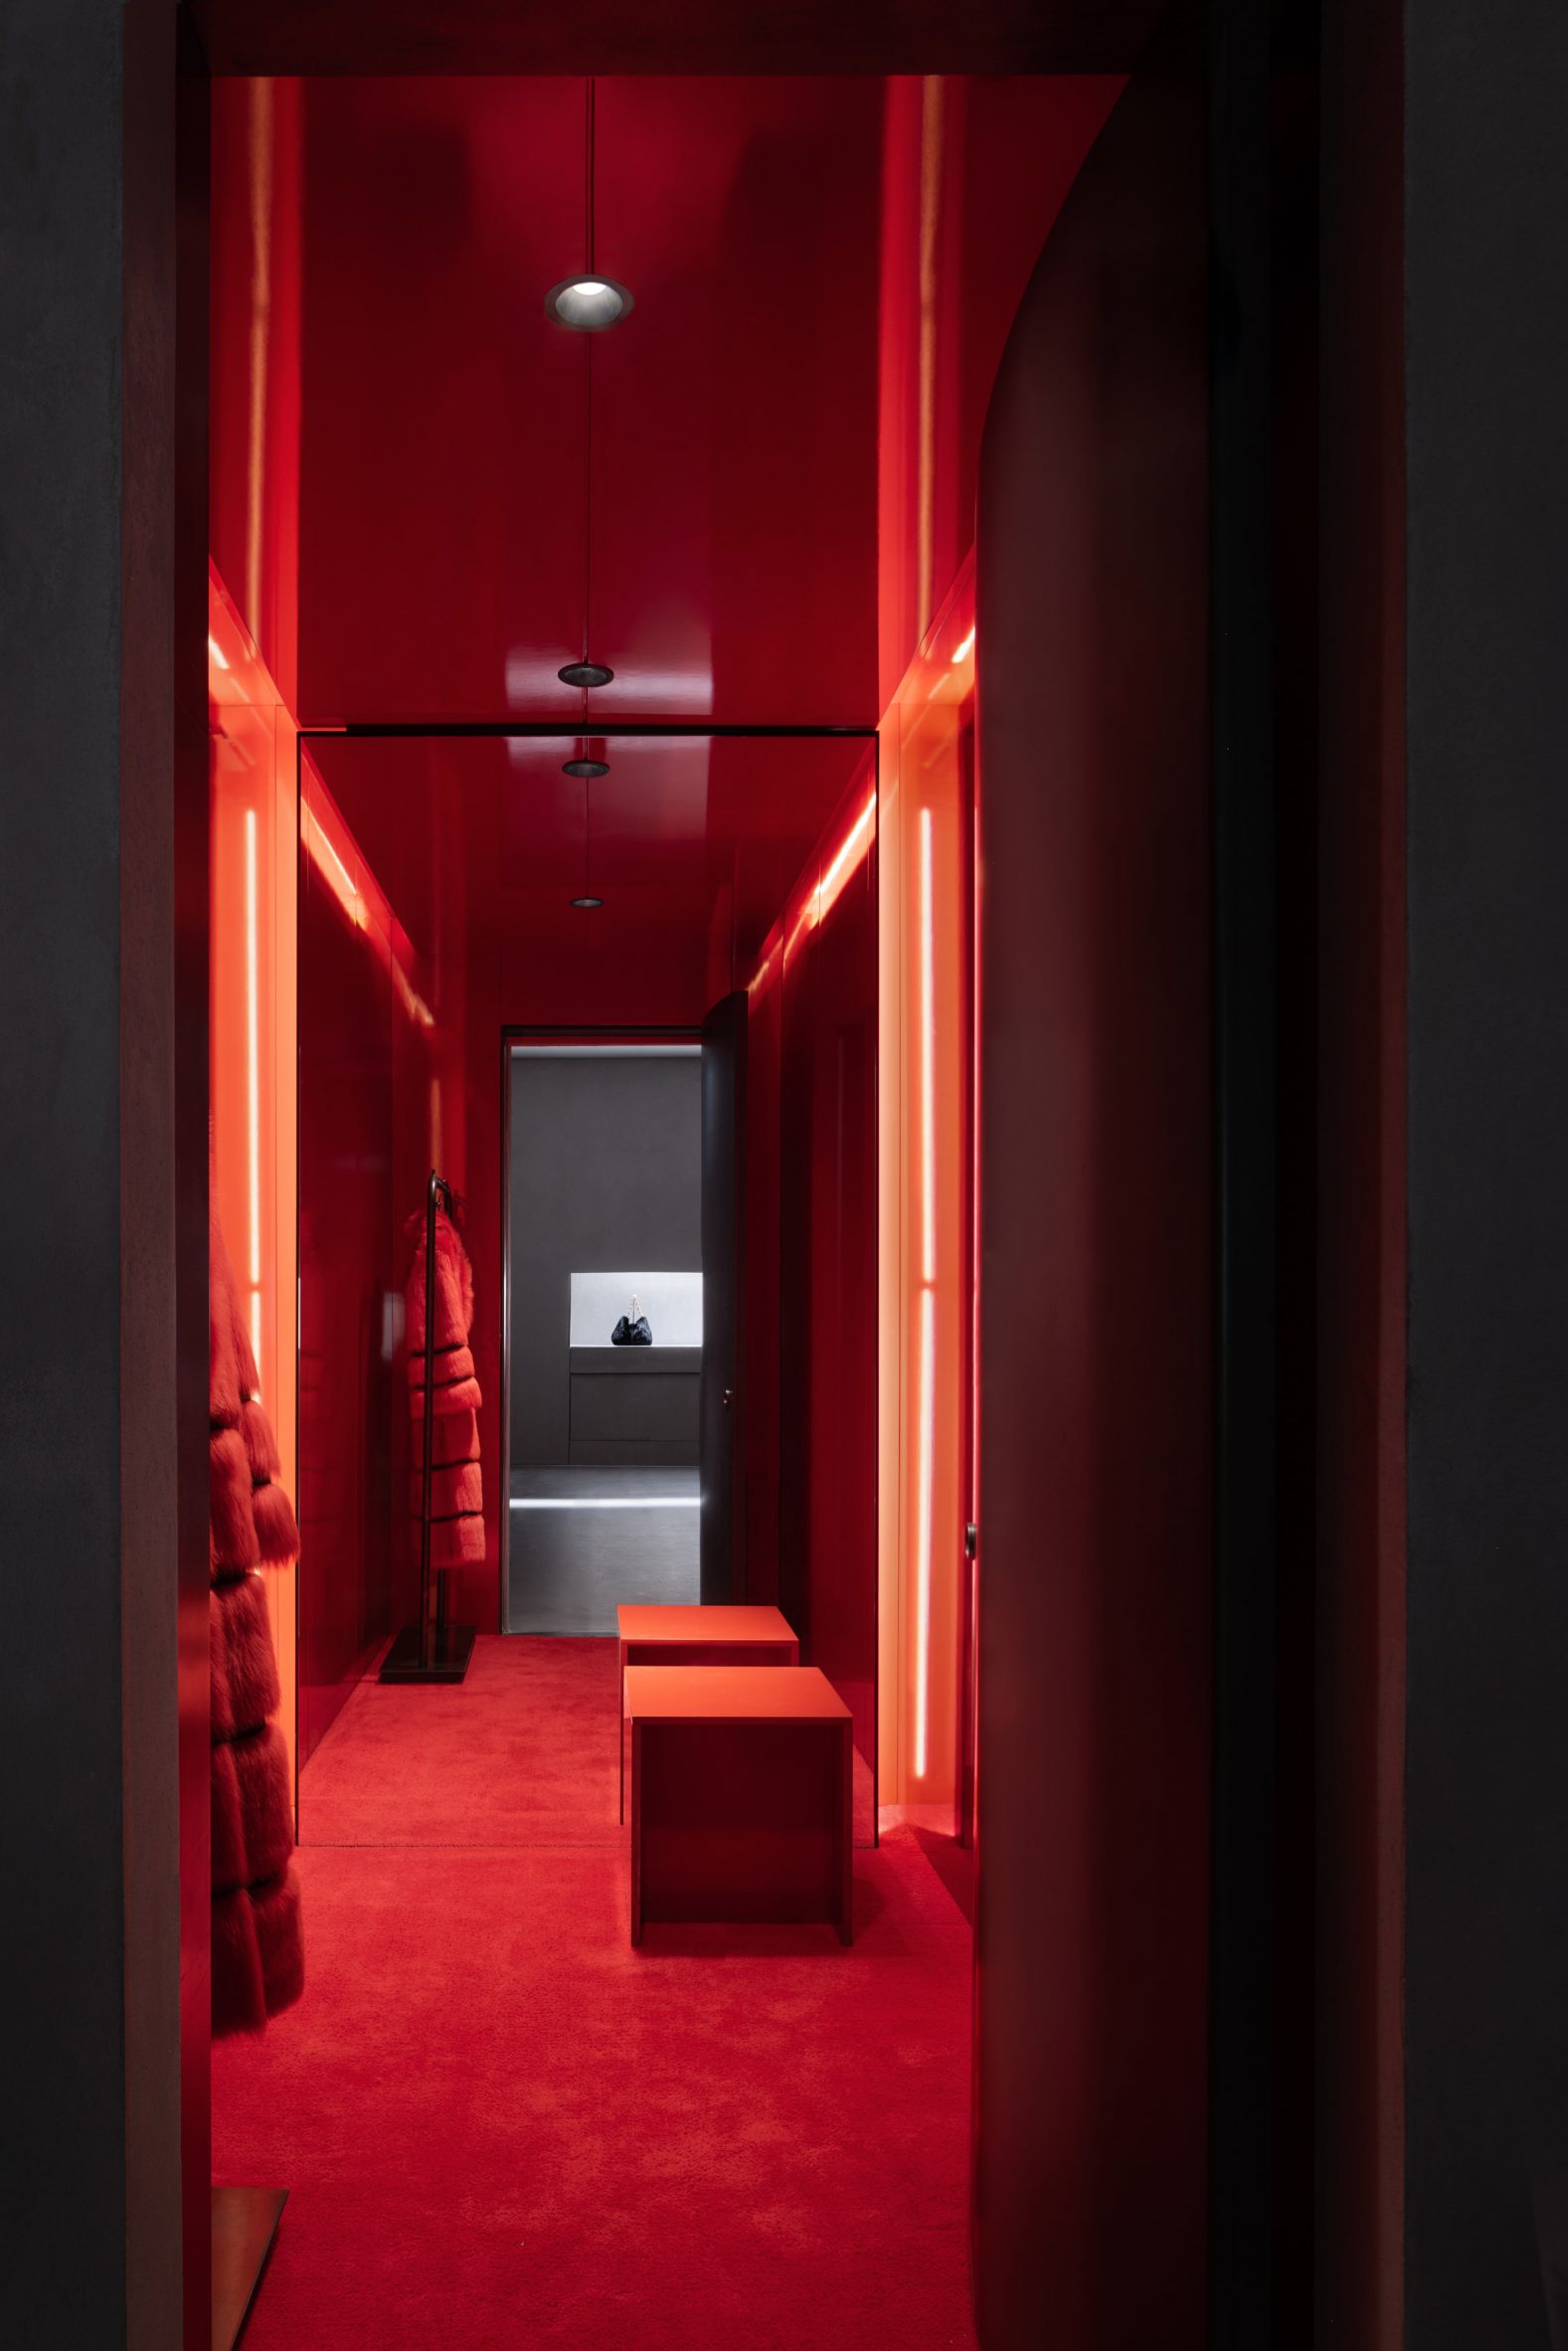 Interior image of a red fitting room